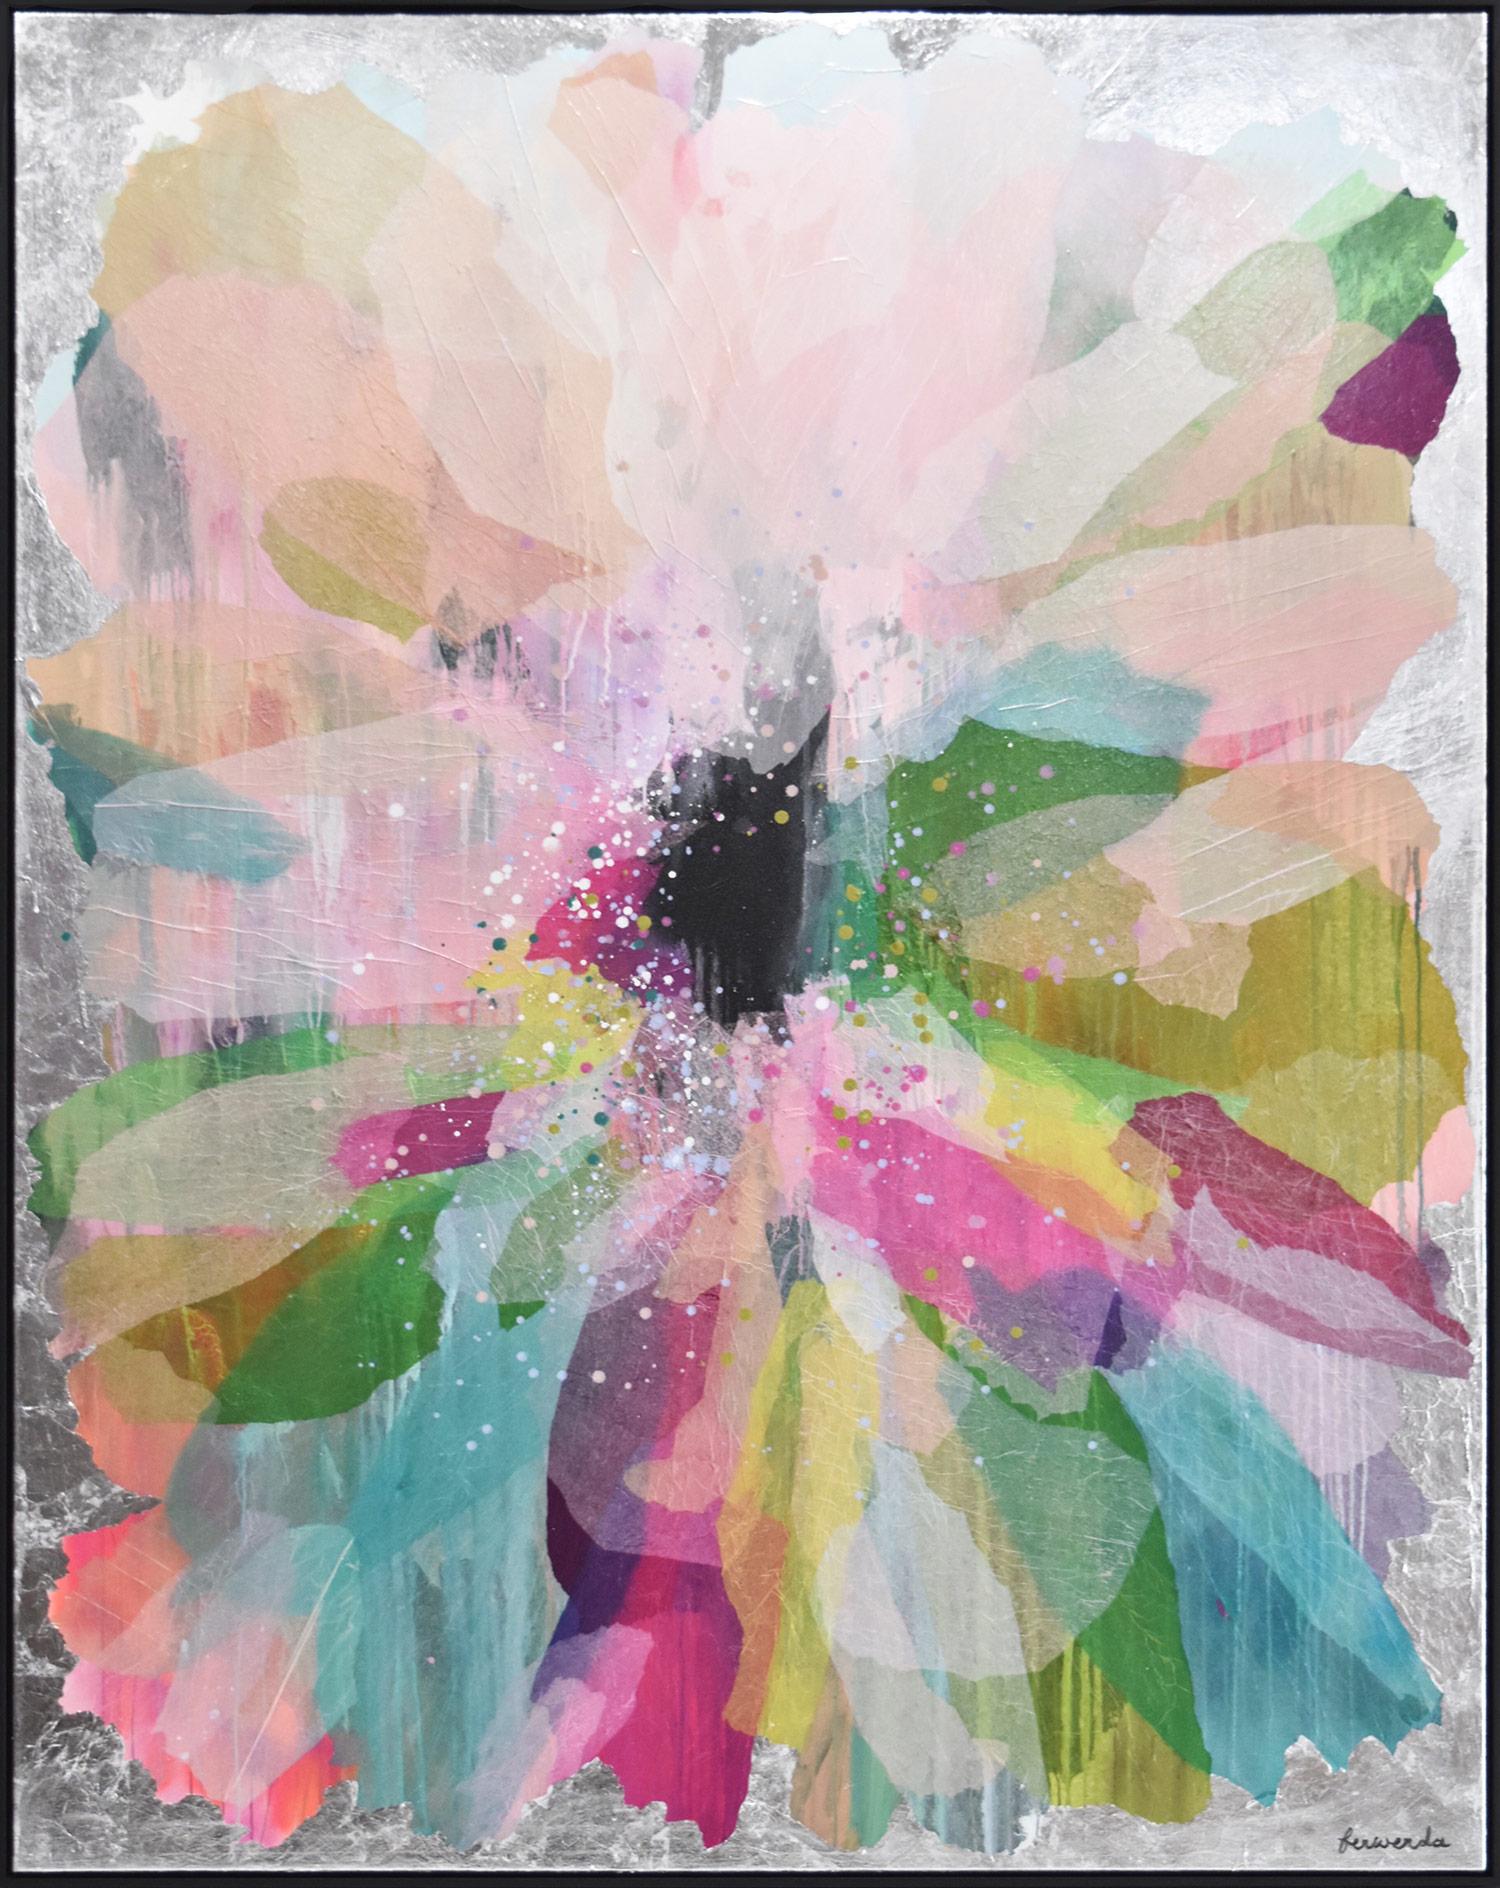 Antoinette Ferwerda Abstract Painting - "Dahlia" Colorful Contemporary Layered Mixed Media Floral Painting on Canvas